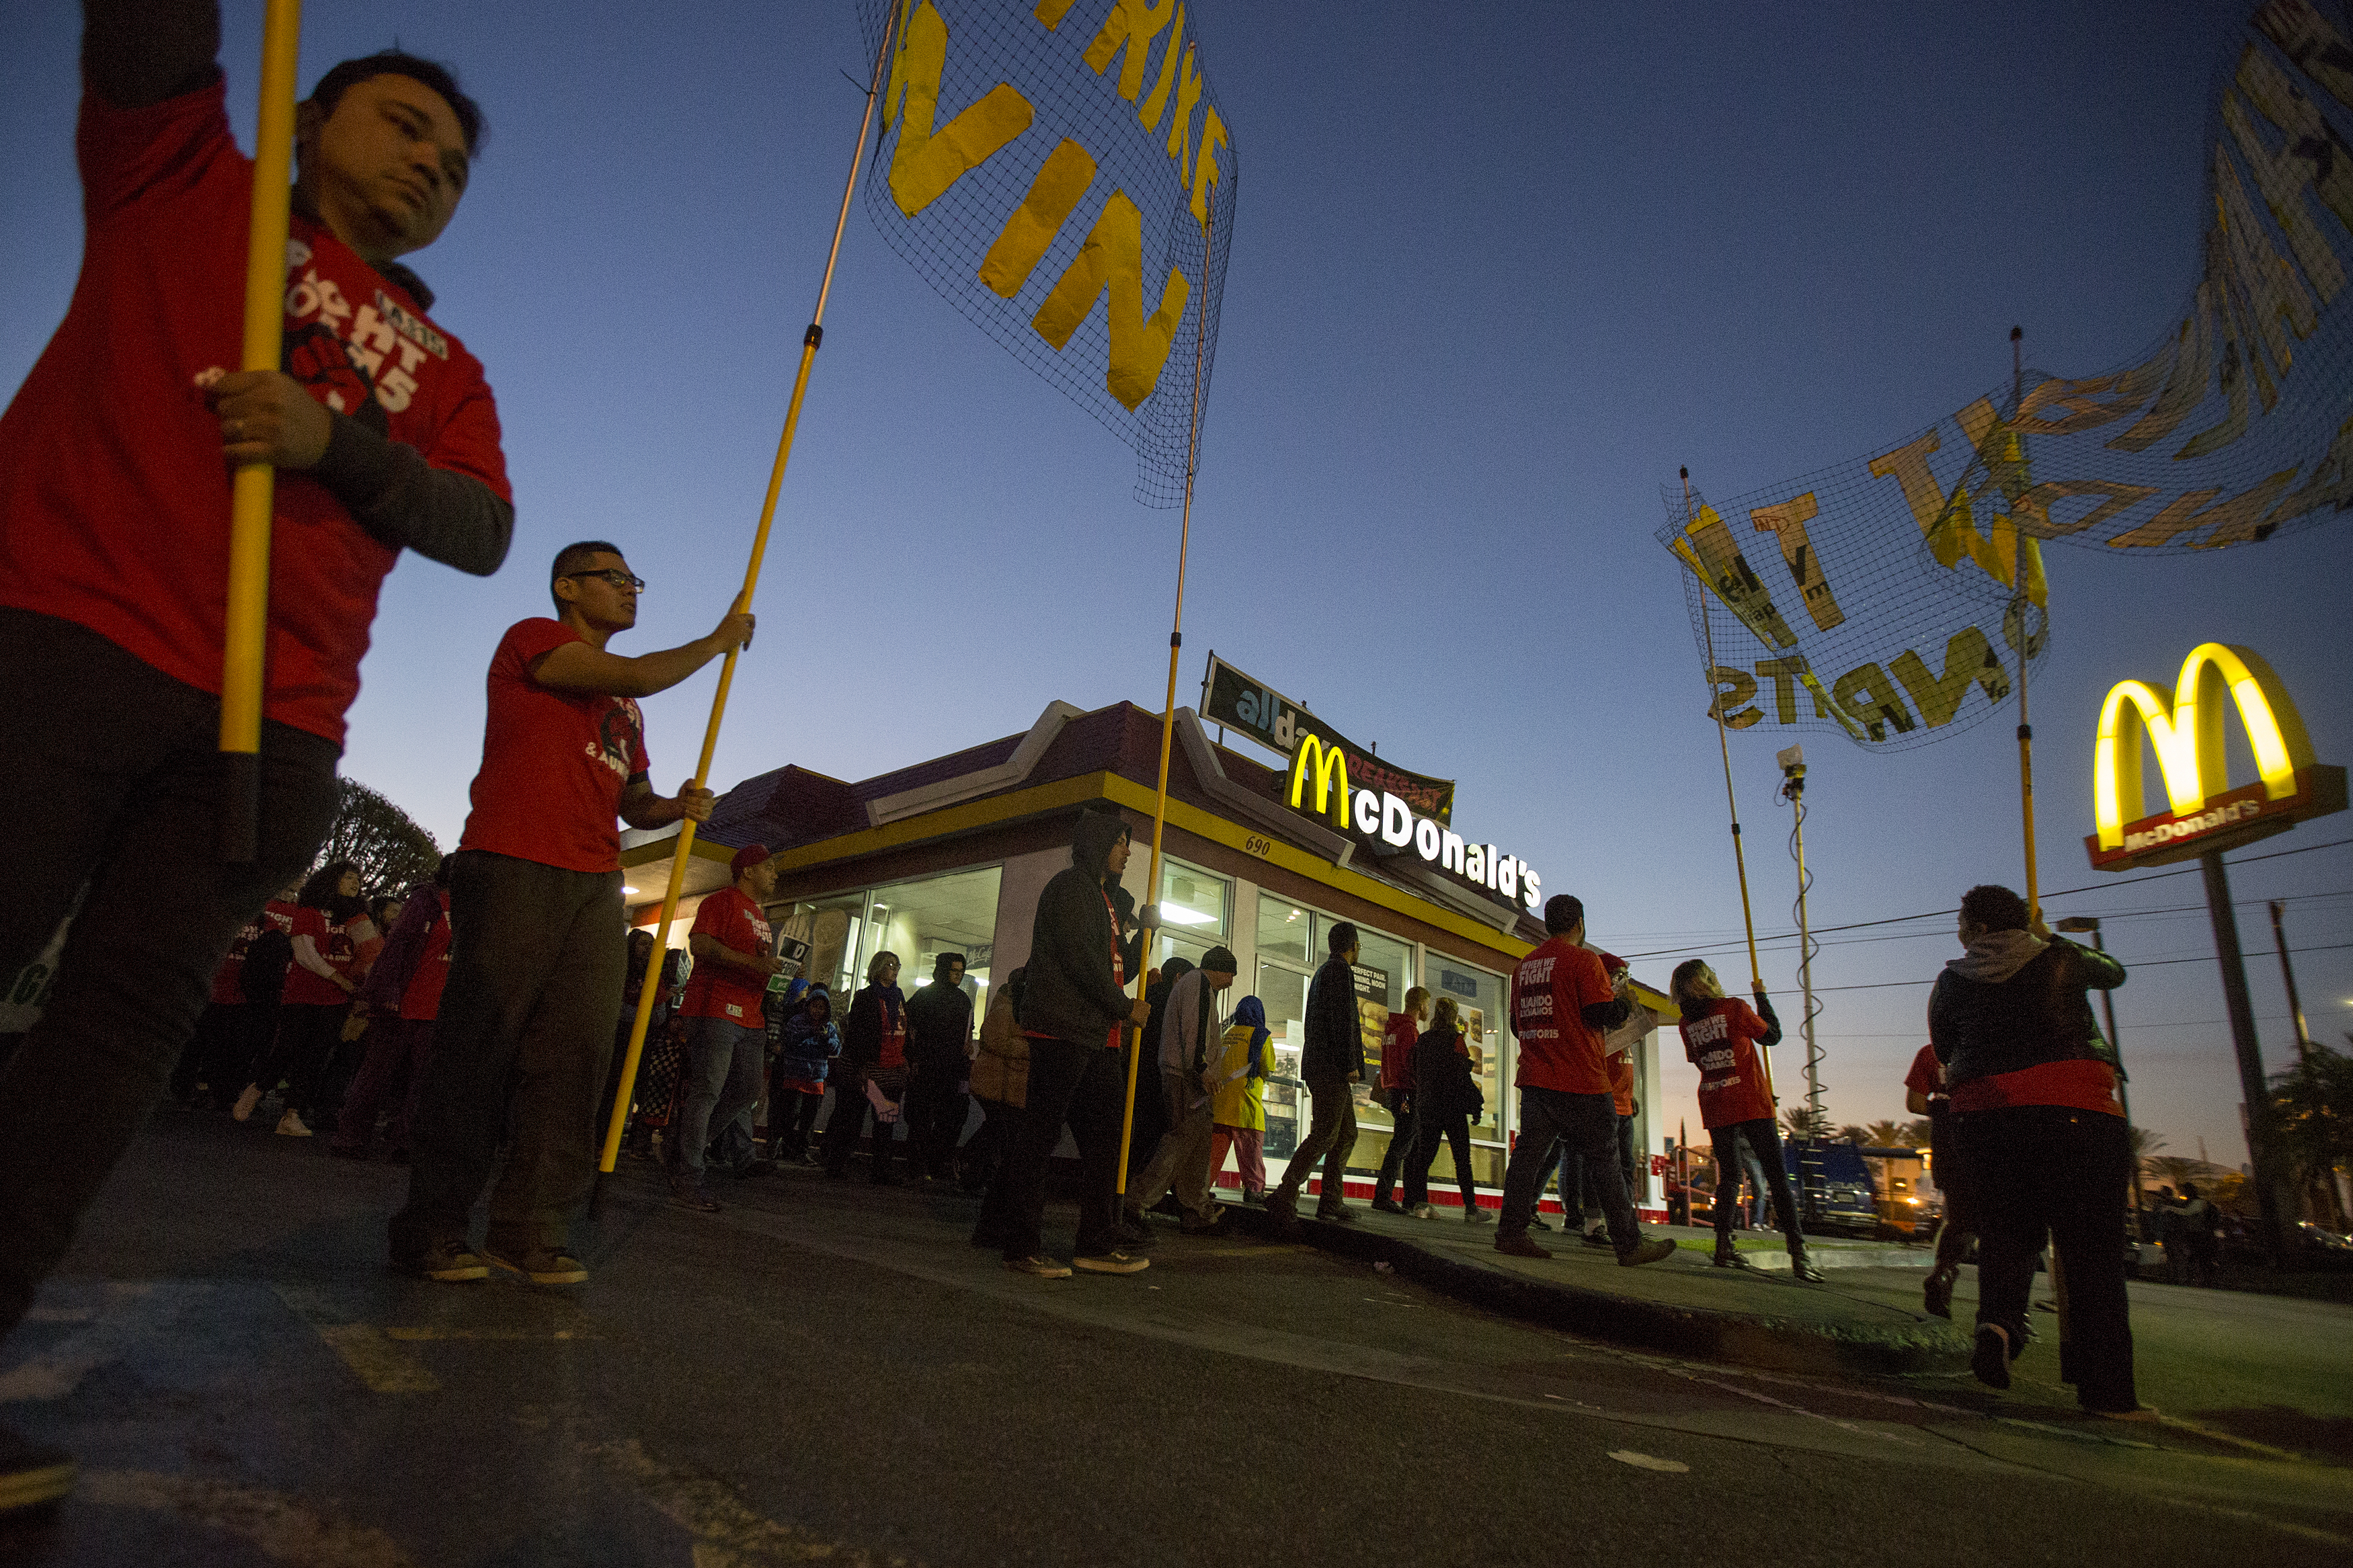 Men holding placards and signs picket outside of a McDonald’s.